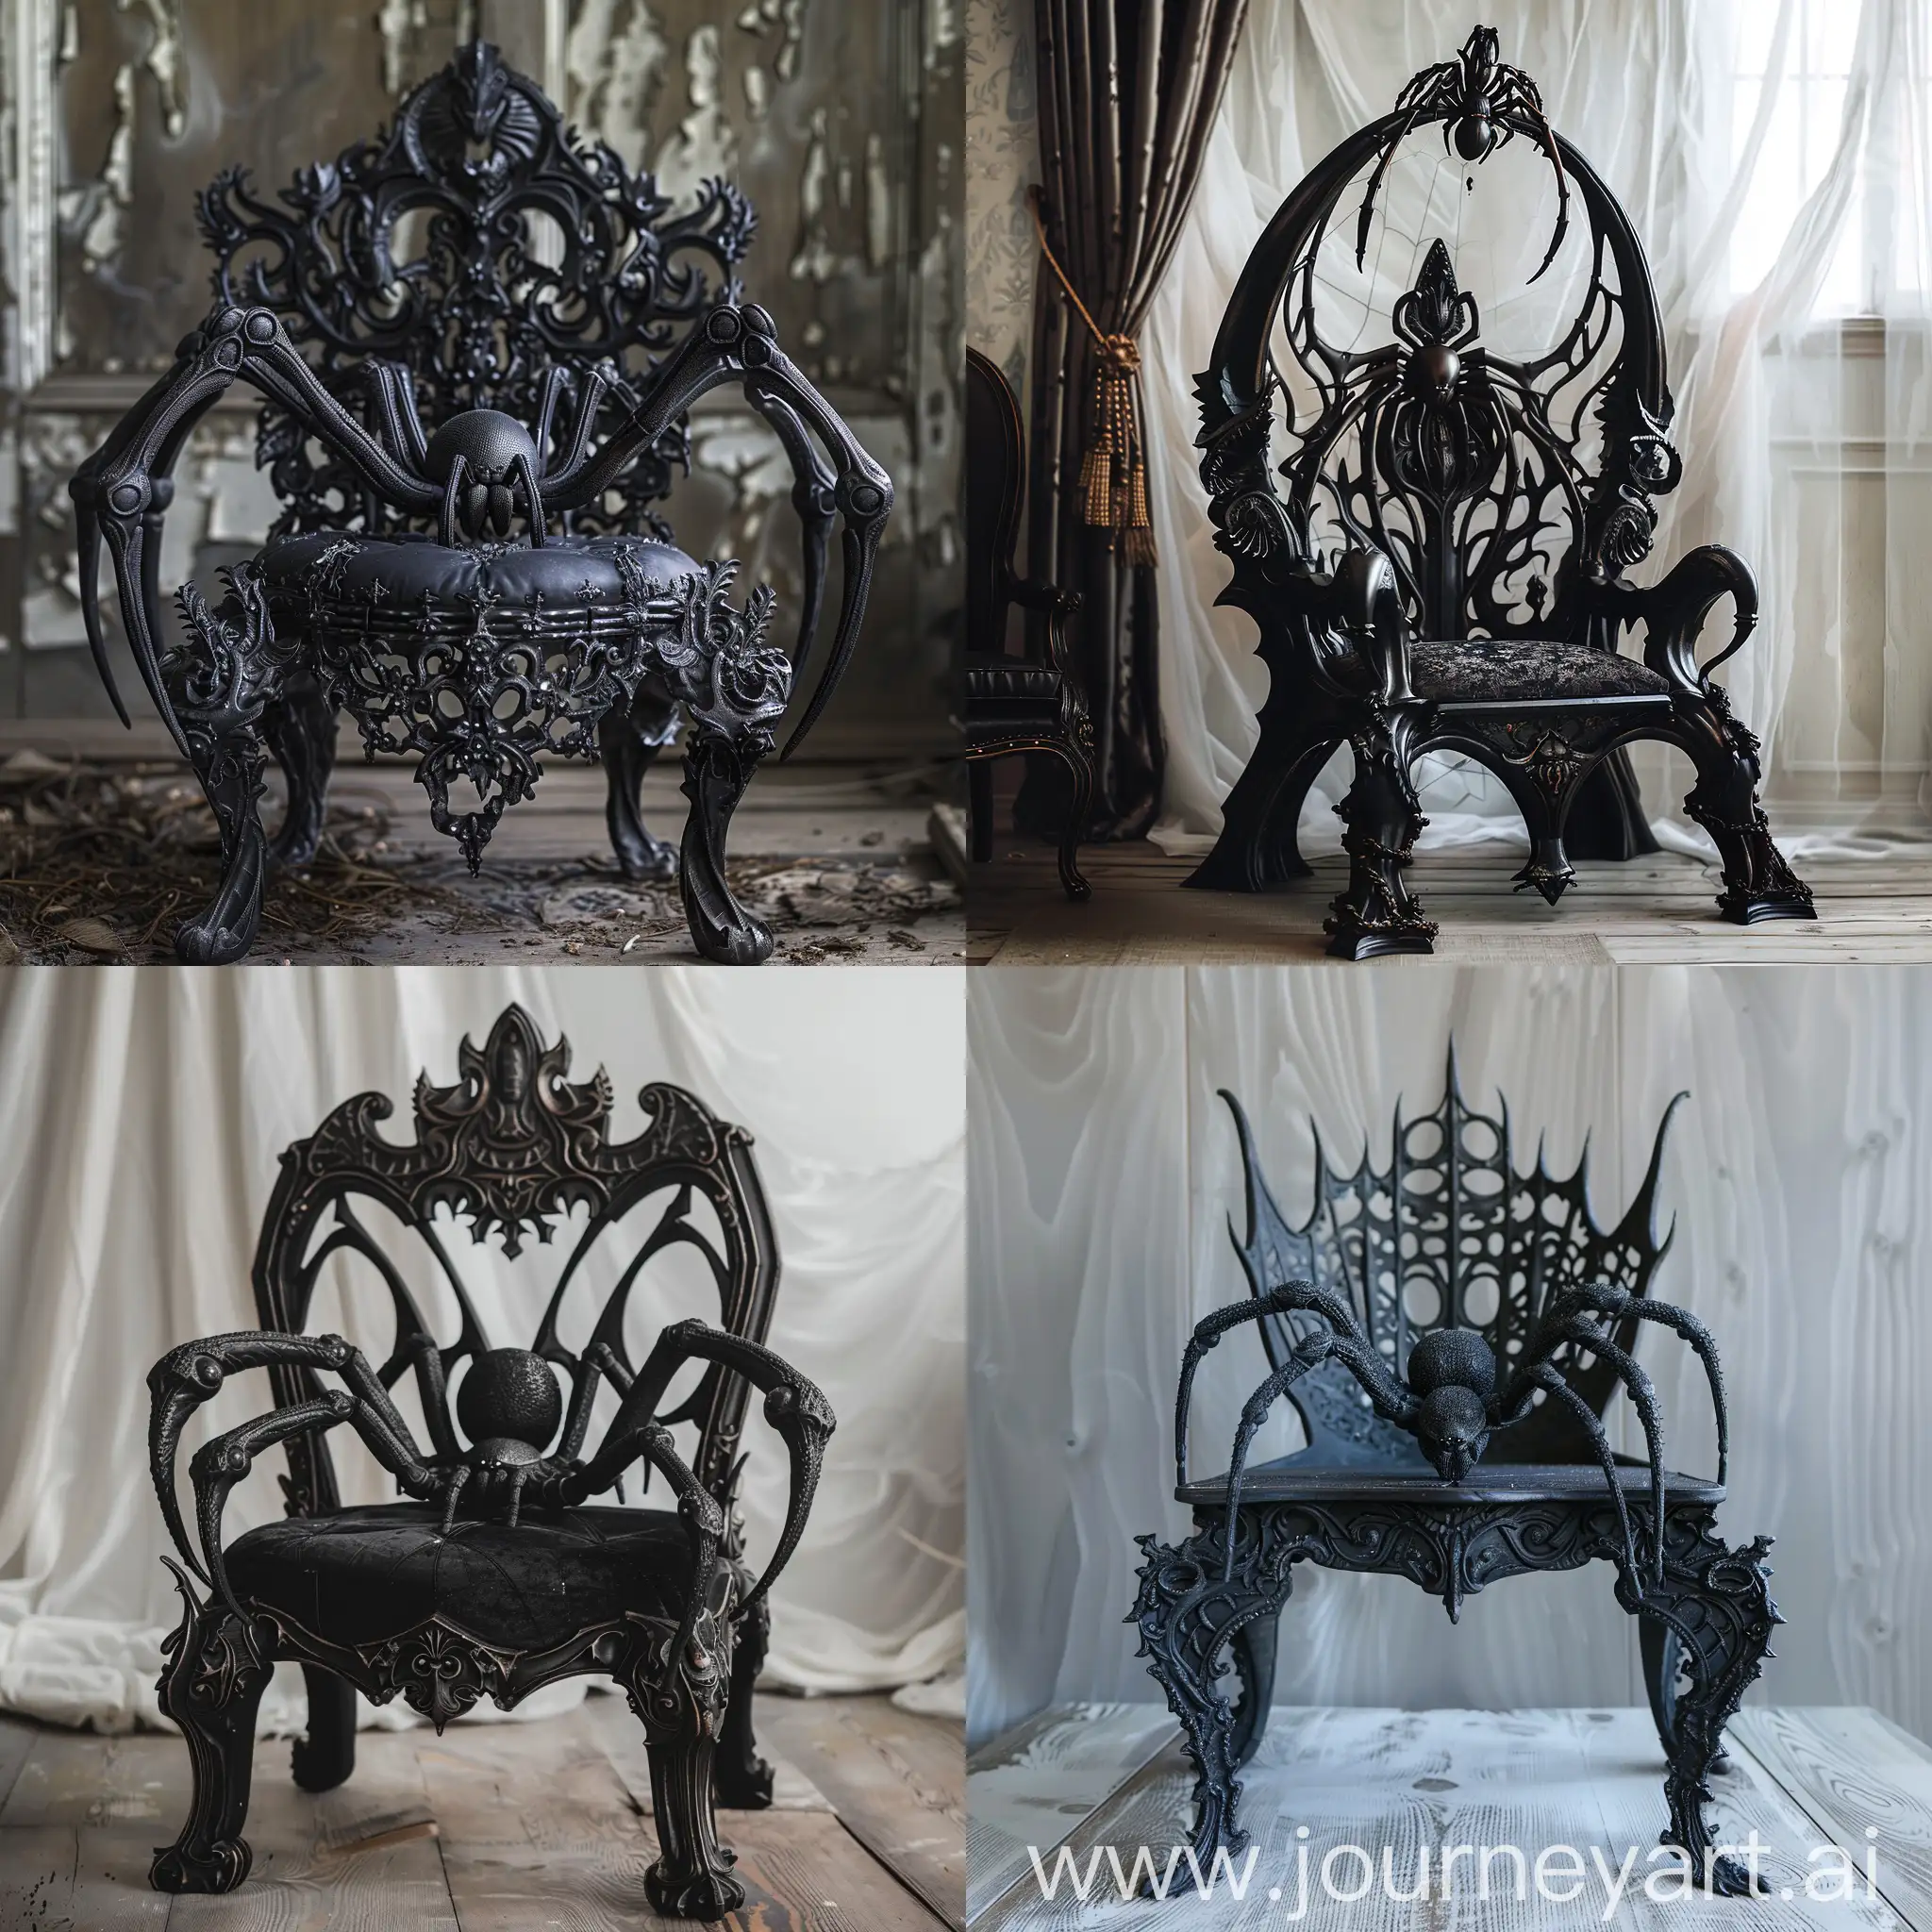 Spider throne with gothic styling